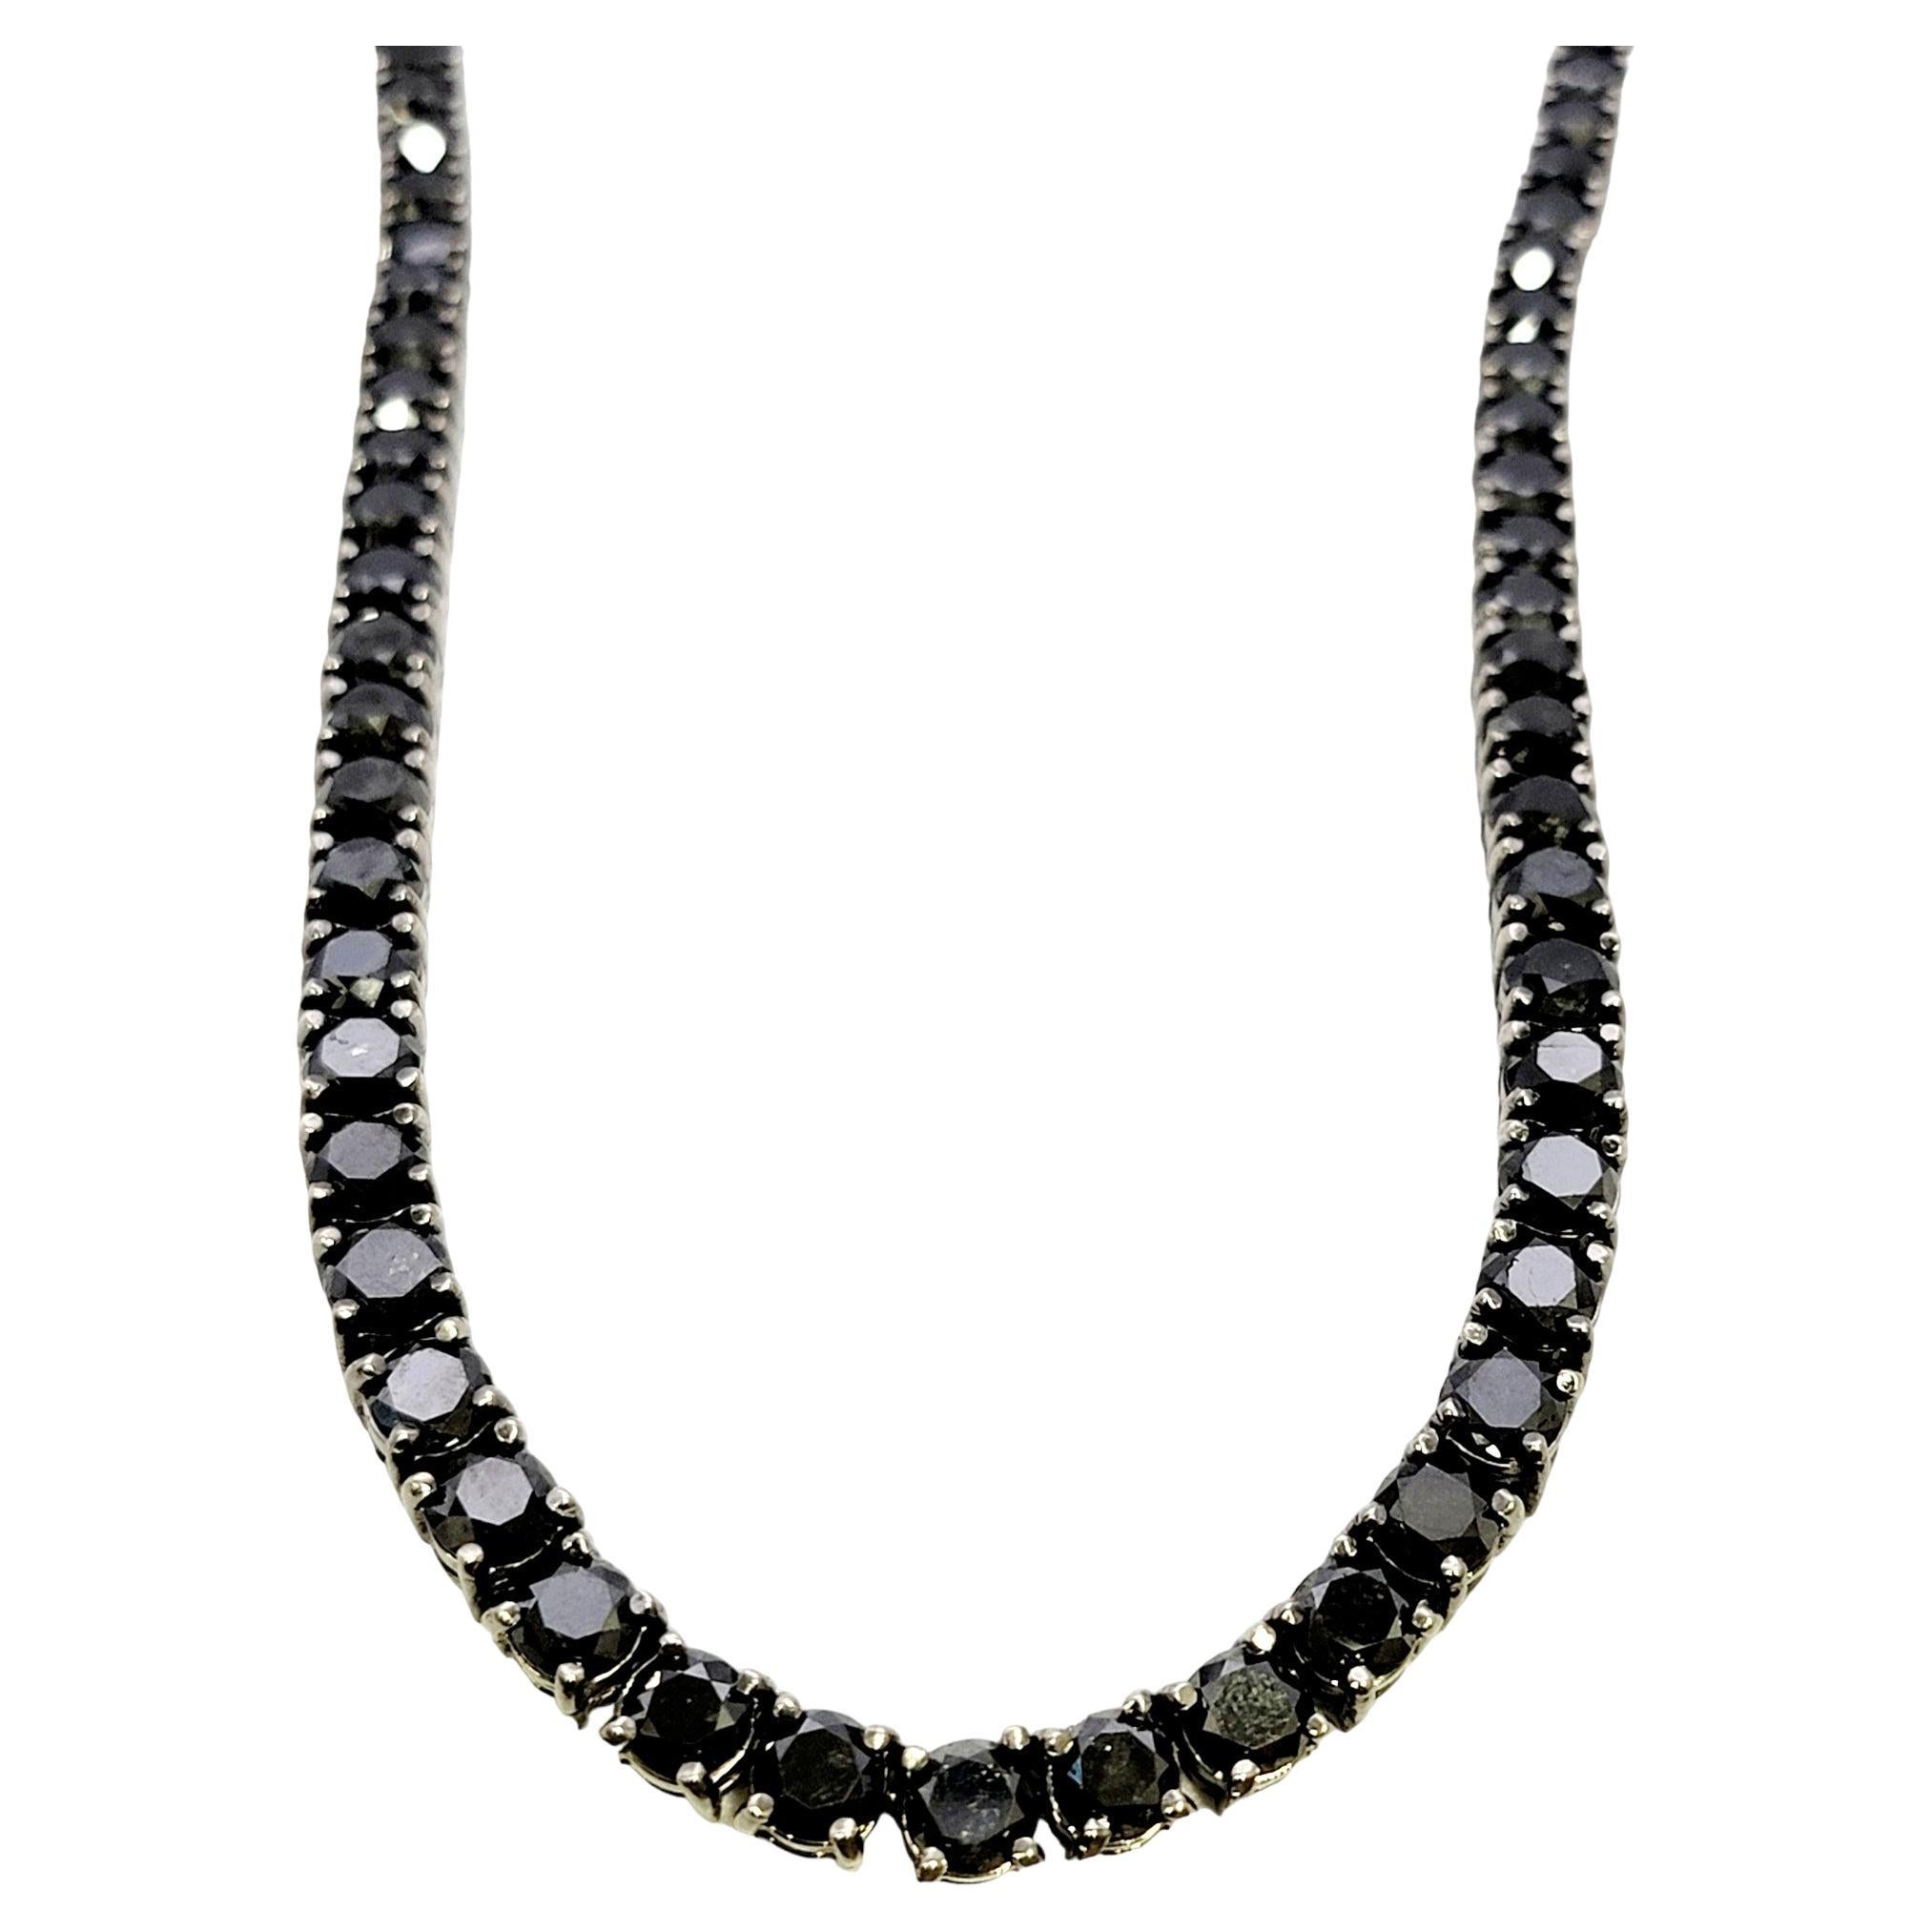 This is an absolutely jaw-dropping black diamond tennis necklace that will stand the test of time. The simple yet elegant design paired with the timeless round diamonds makes this piece a true classic that will never go out of style. 

This stunning